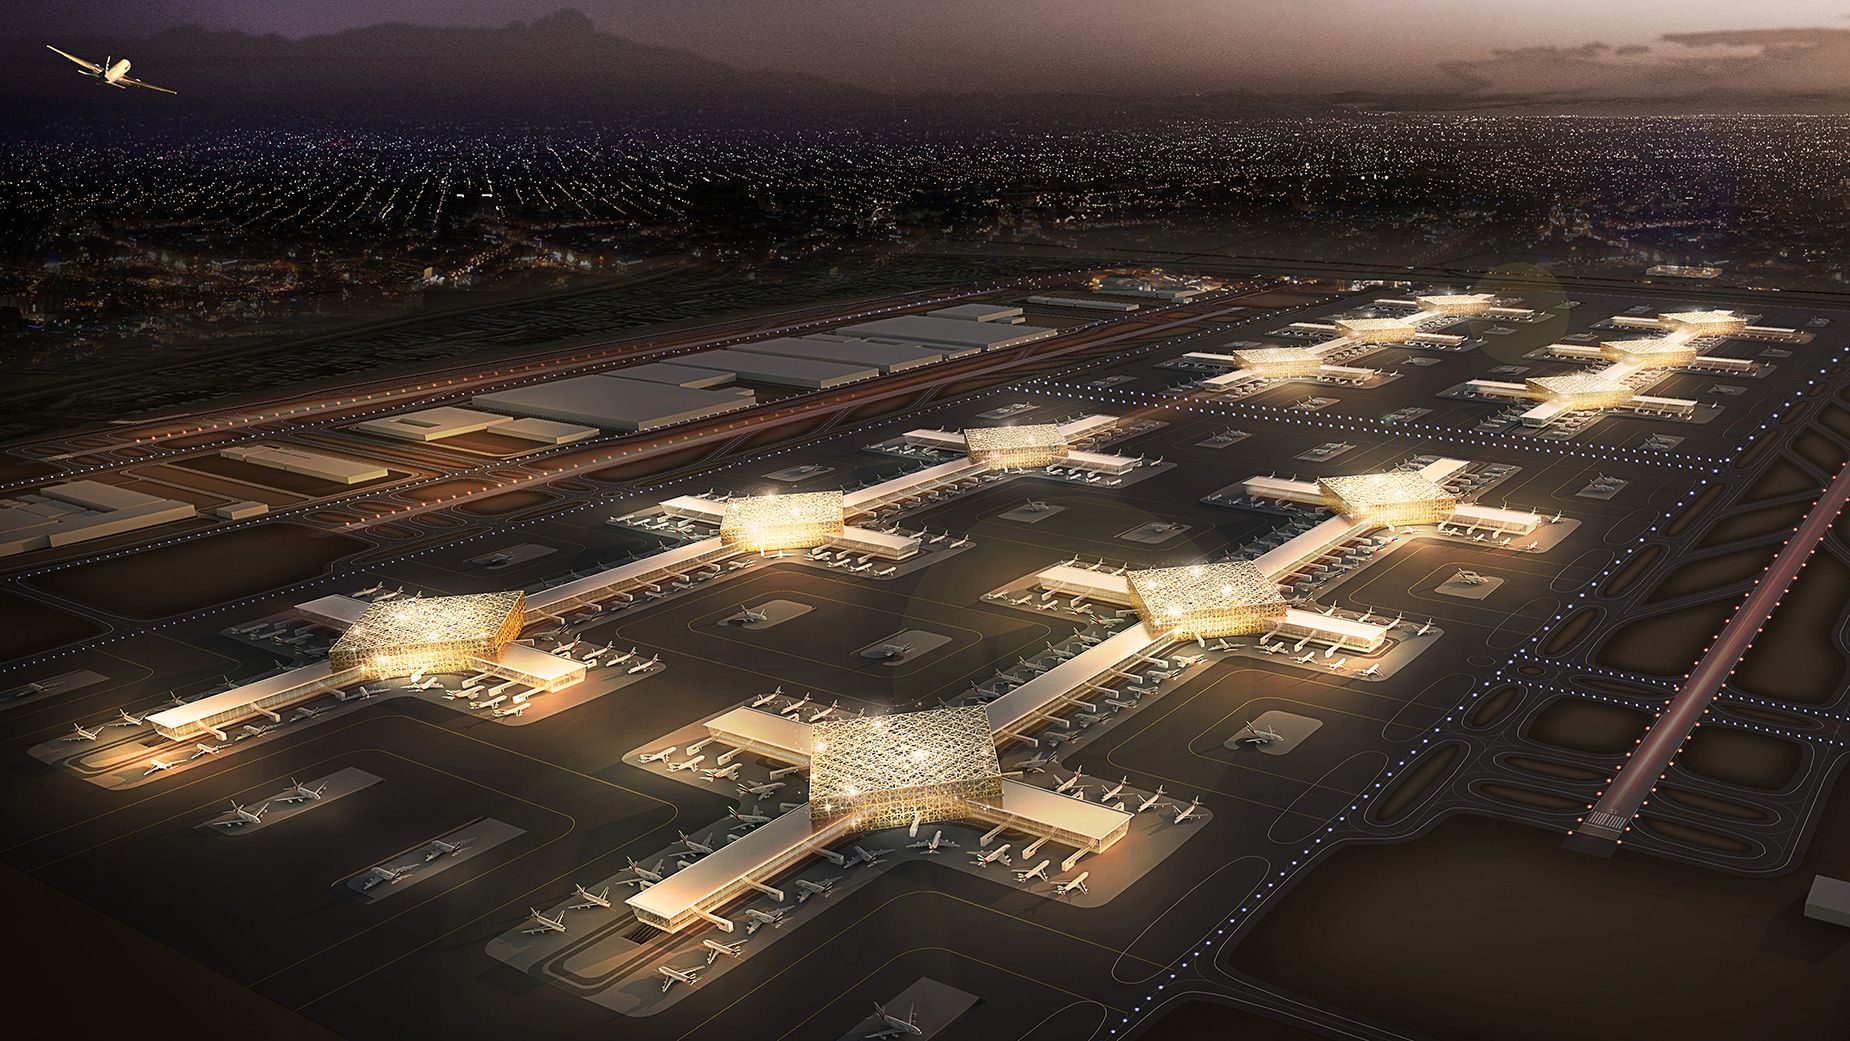 It is thought that the huge airport will have six runways and three terminal buildings